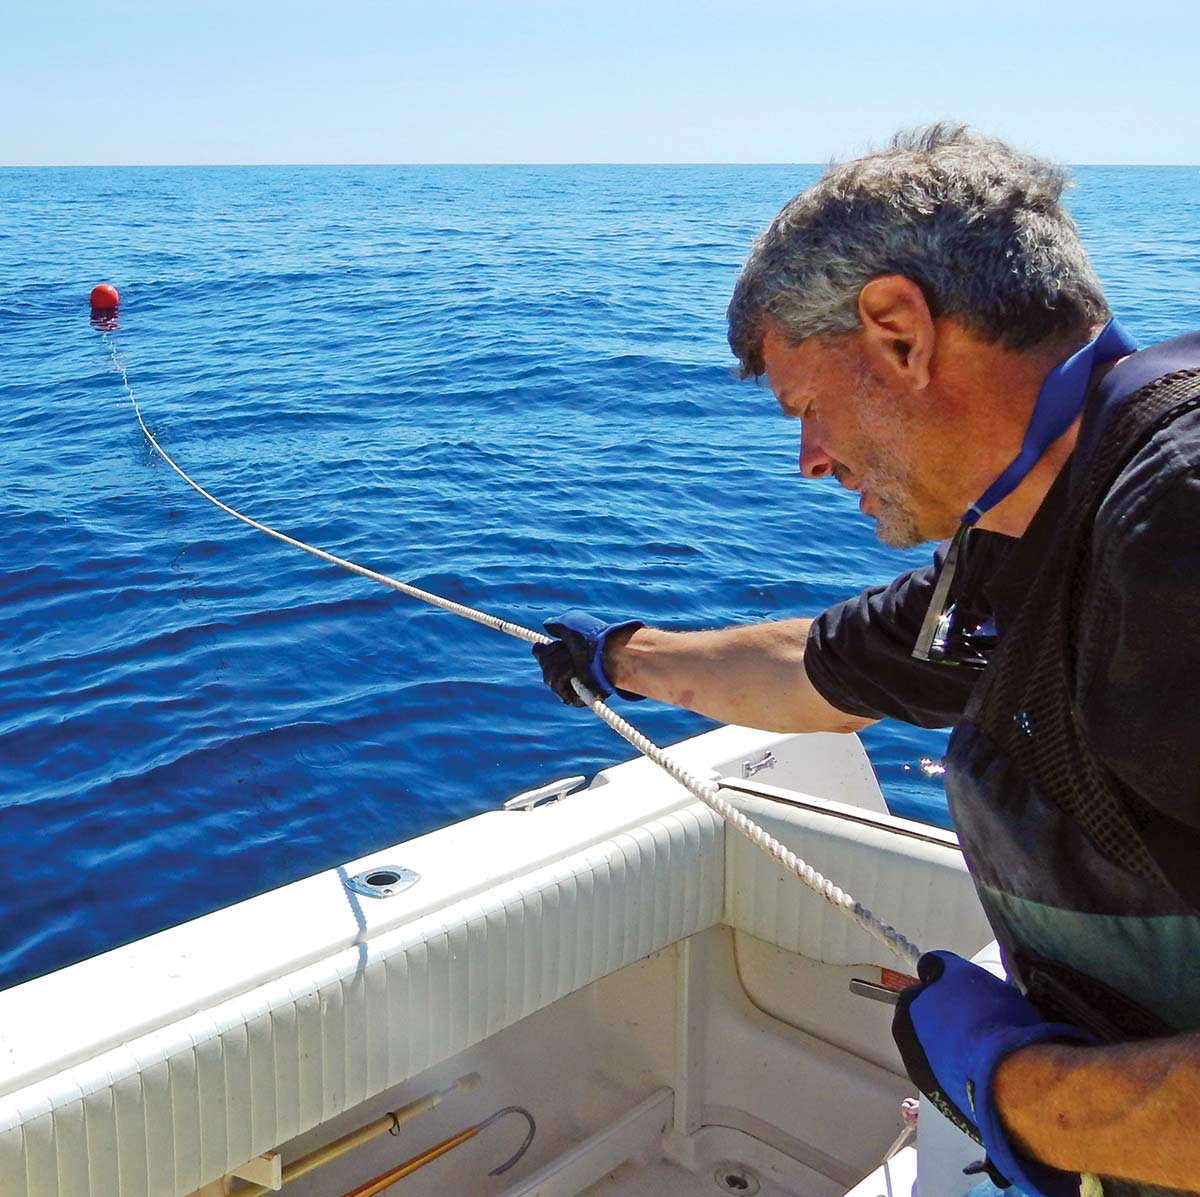 Lock It In: How To Set Up For Wreck Fishing - The Fisherman